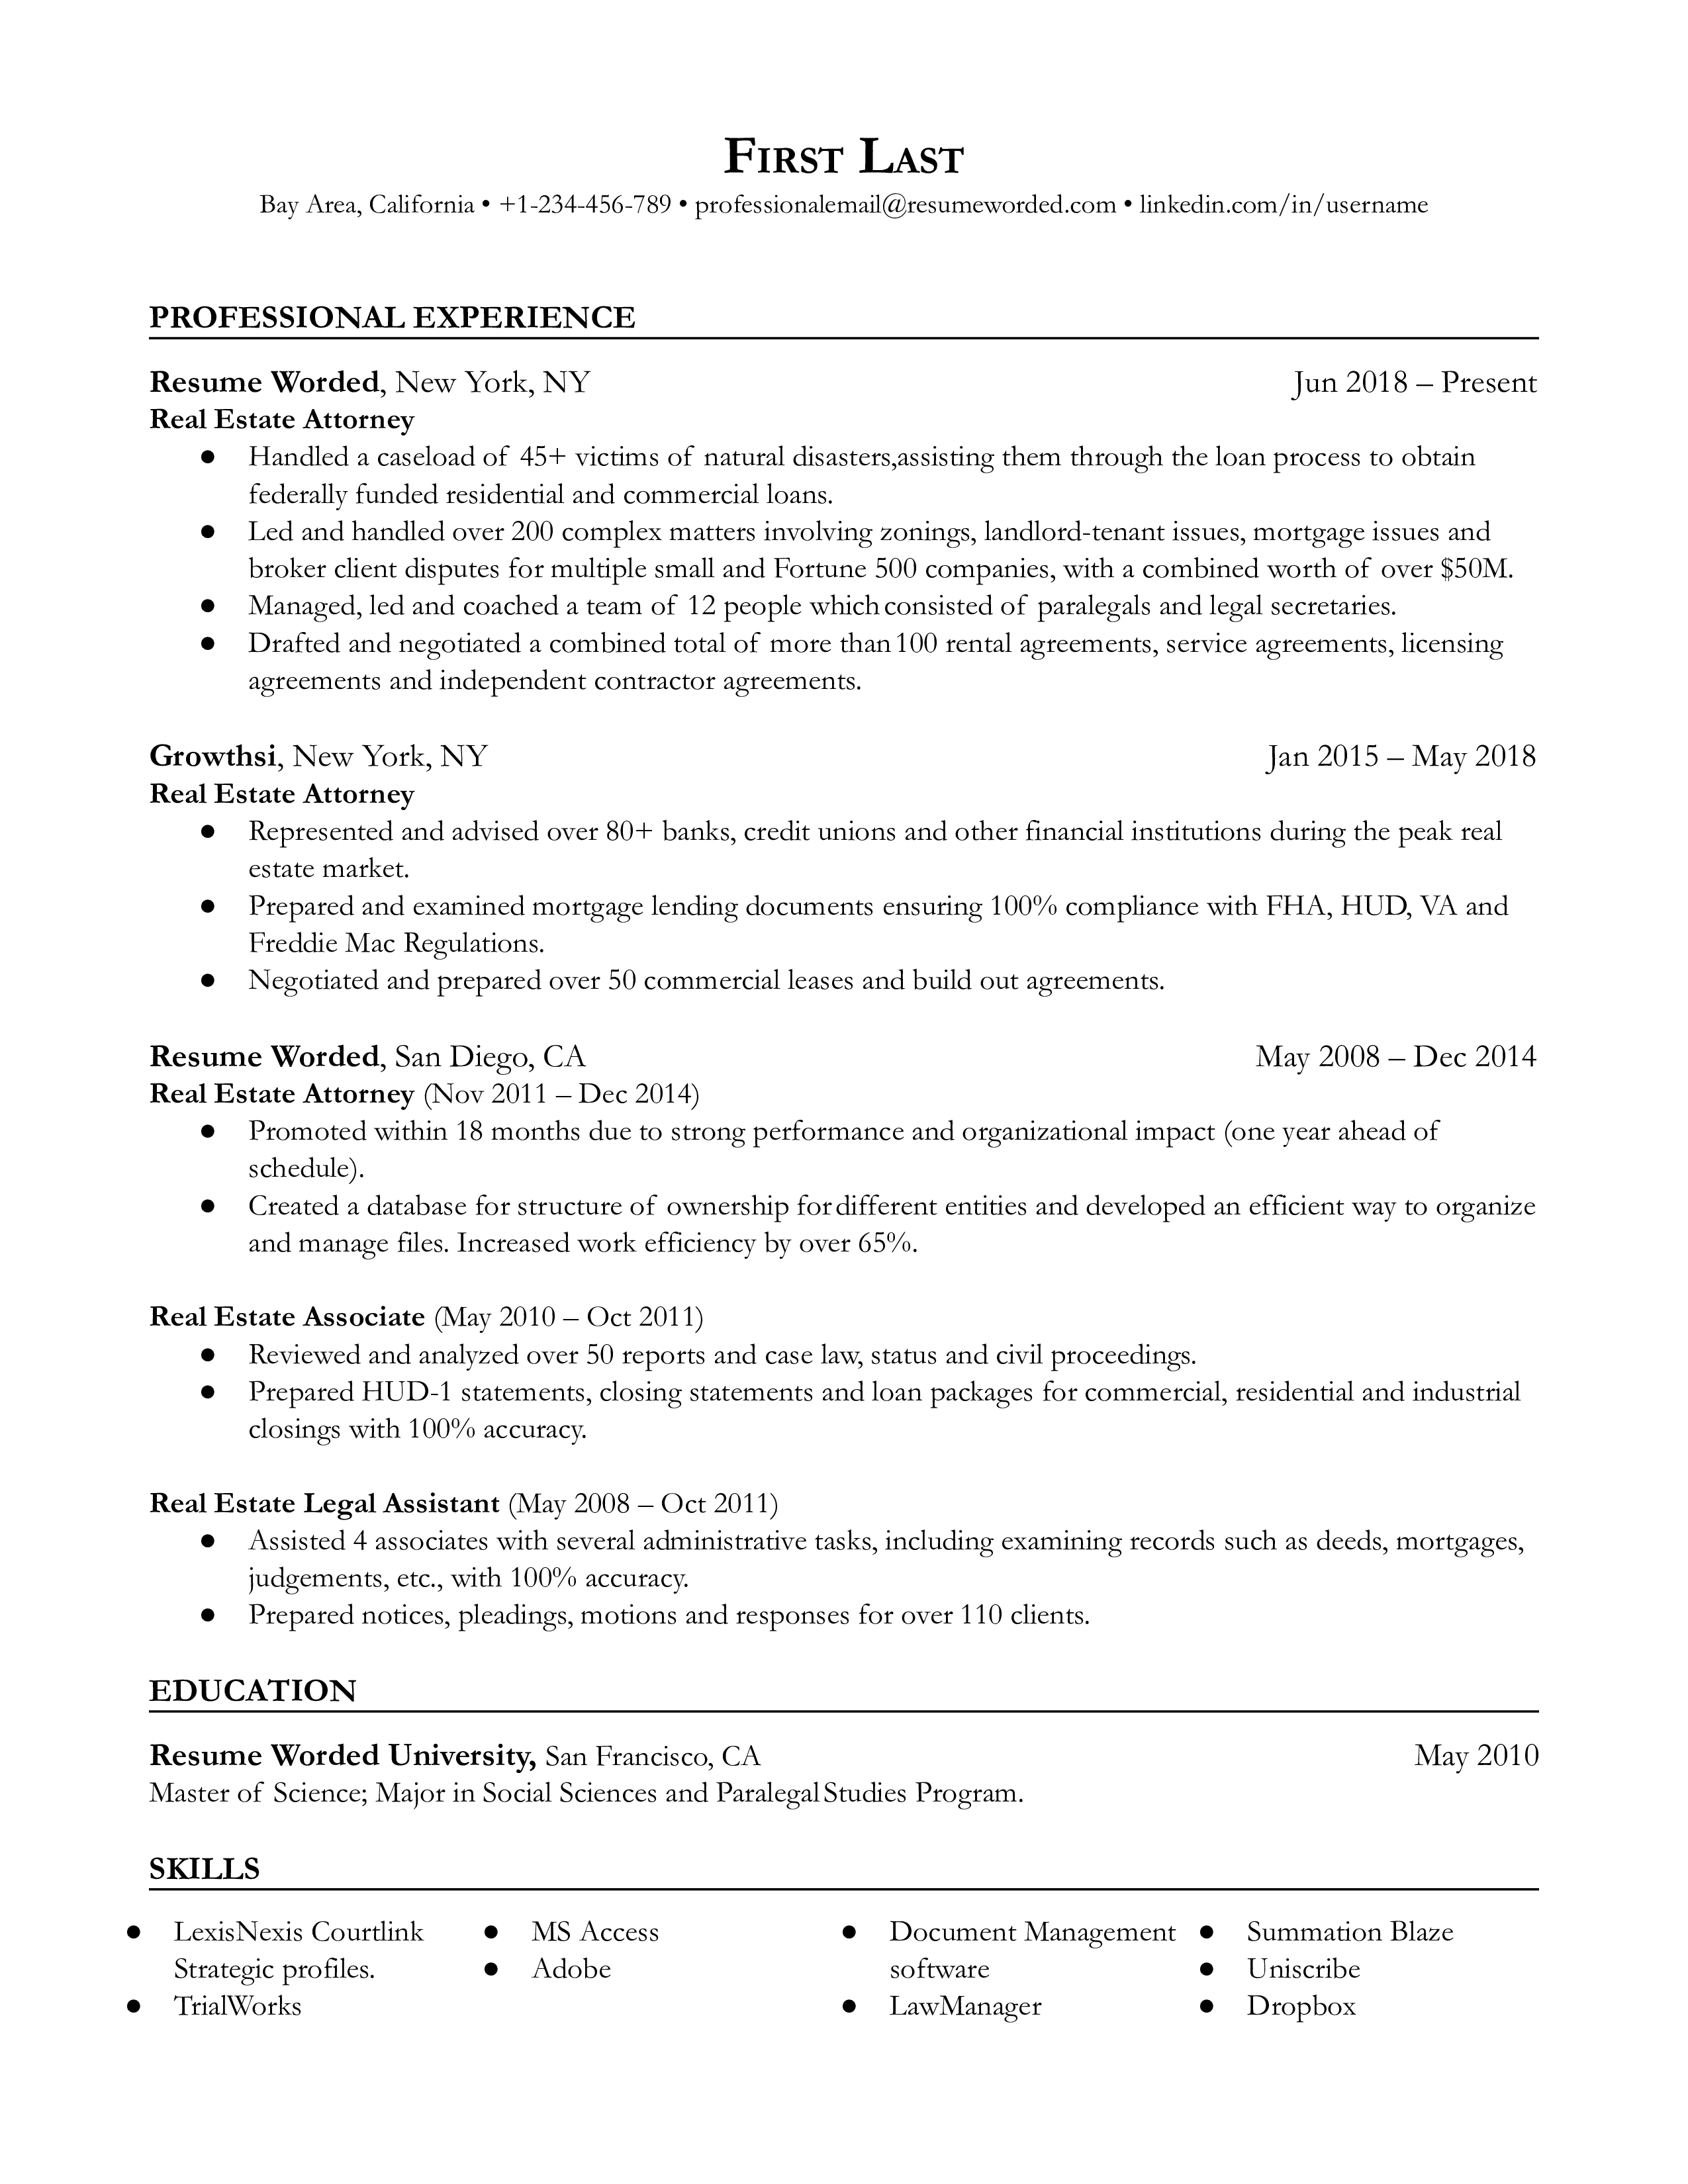 Real Estate Attorney Resume Template + Example